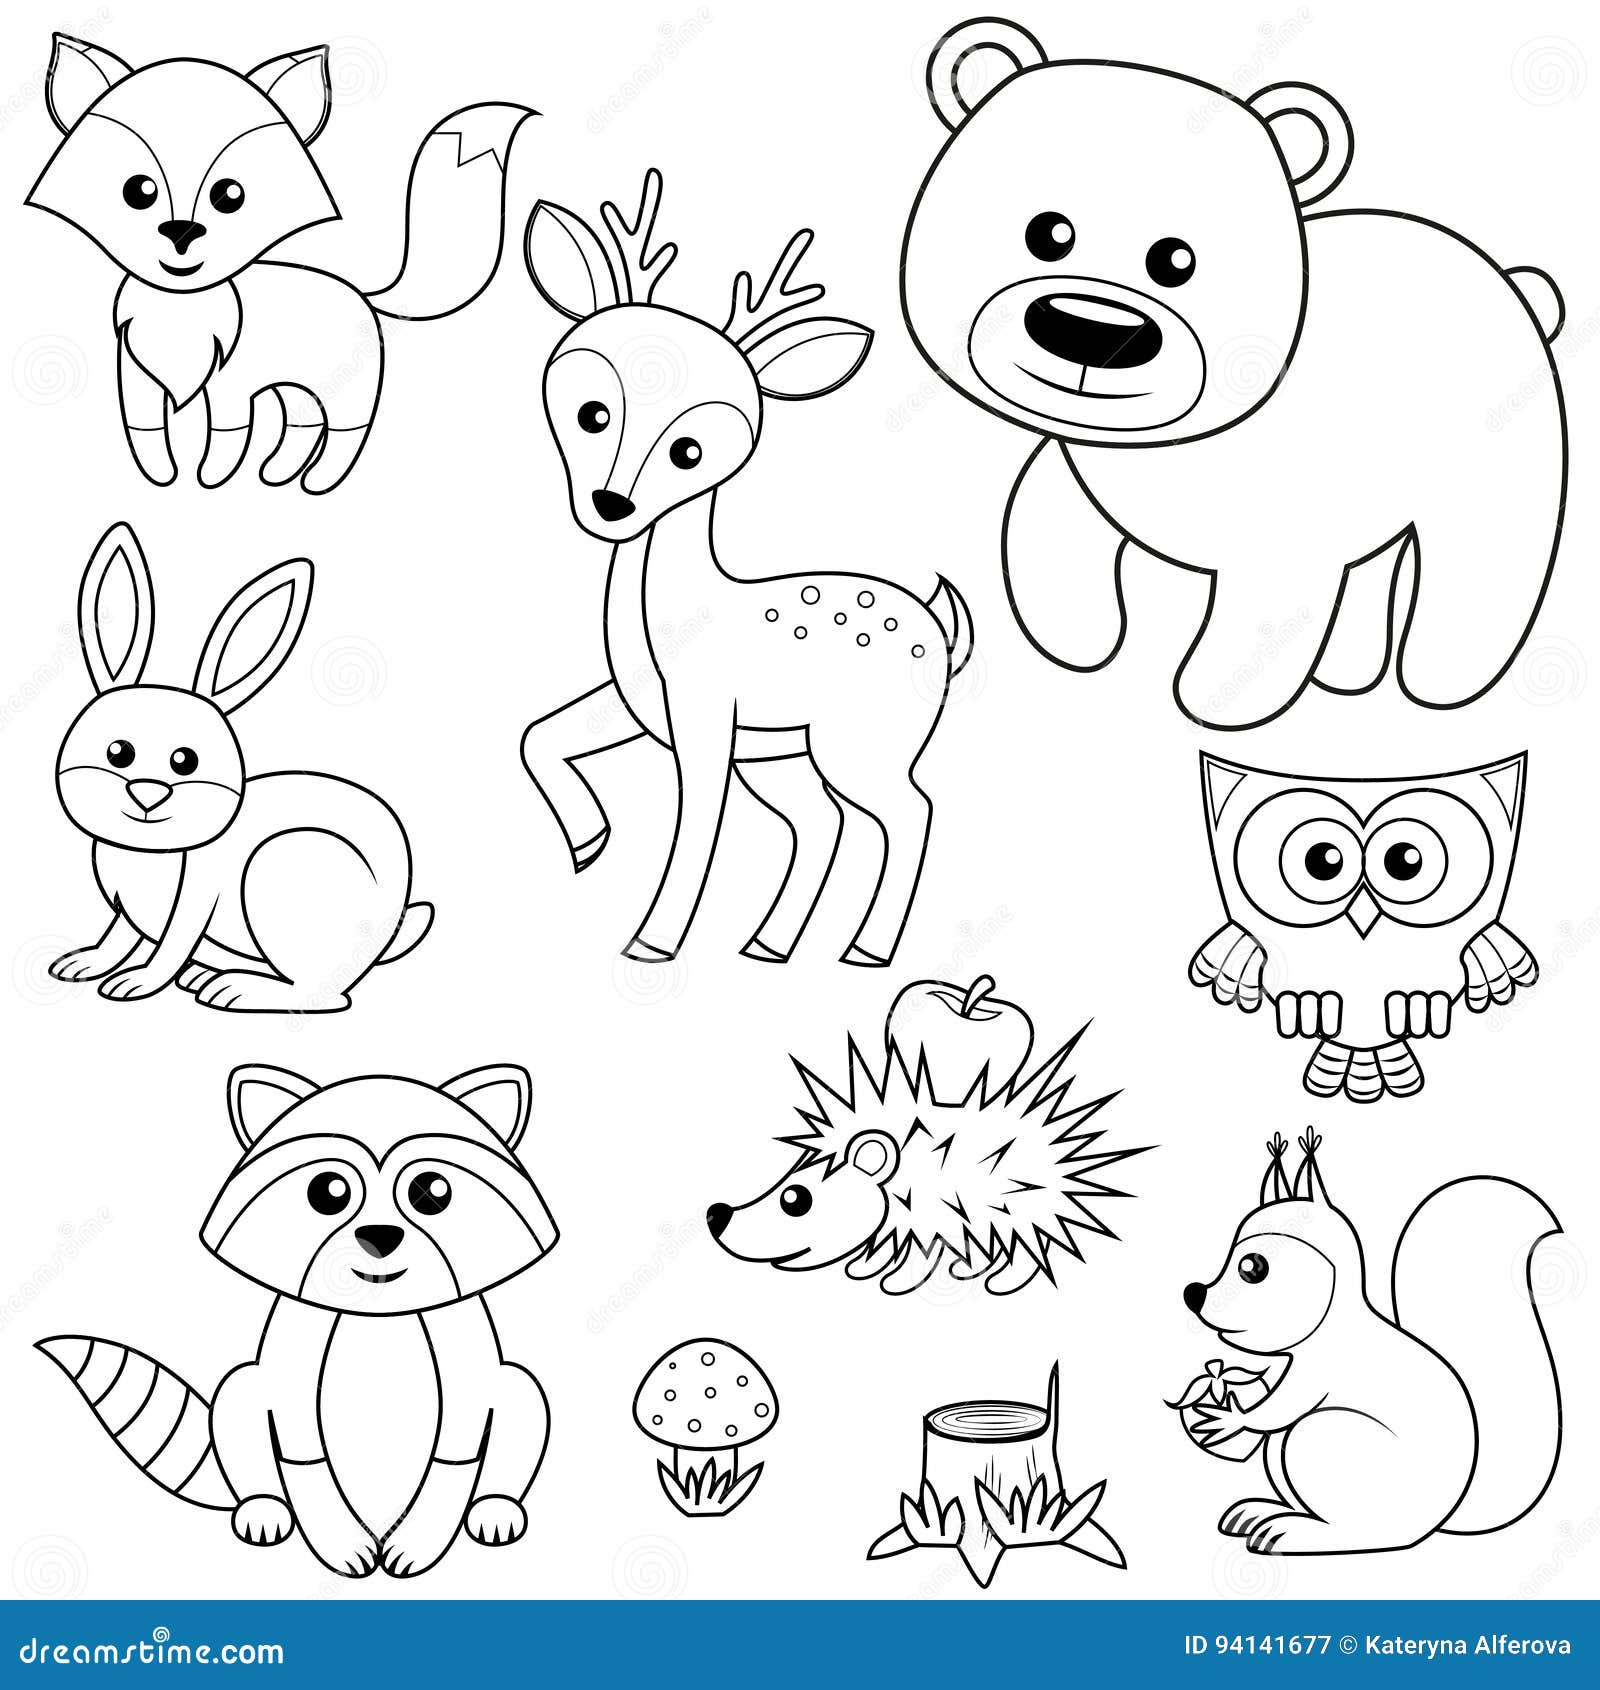 forest animals. fox, bear, raccon, hare, deer, owl, hedgehog, squirrel, agaric and tree stump. black and white  